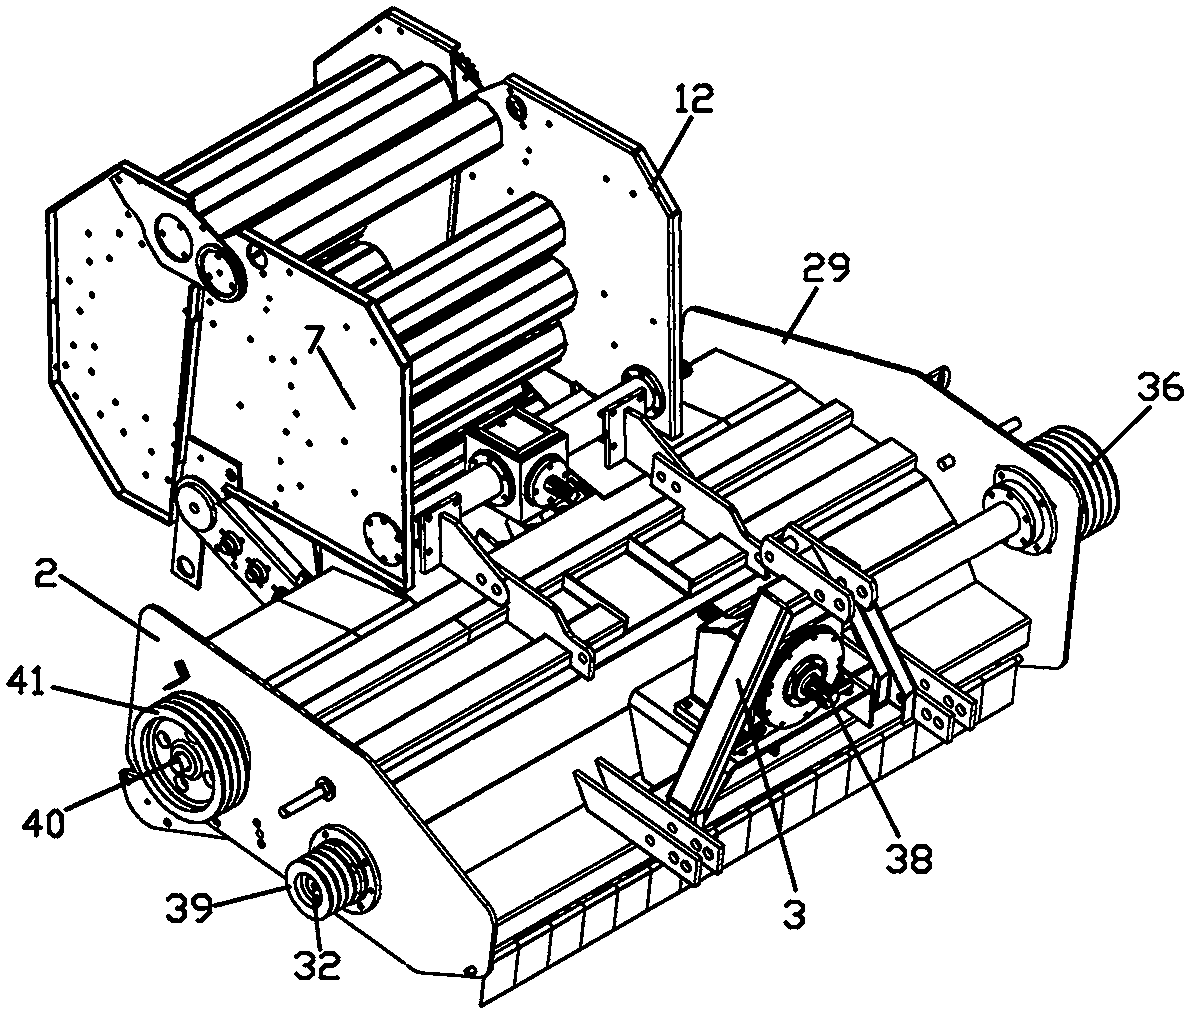 A straw harvesting,smashing and collective rubbing device for a roll bale press baler